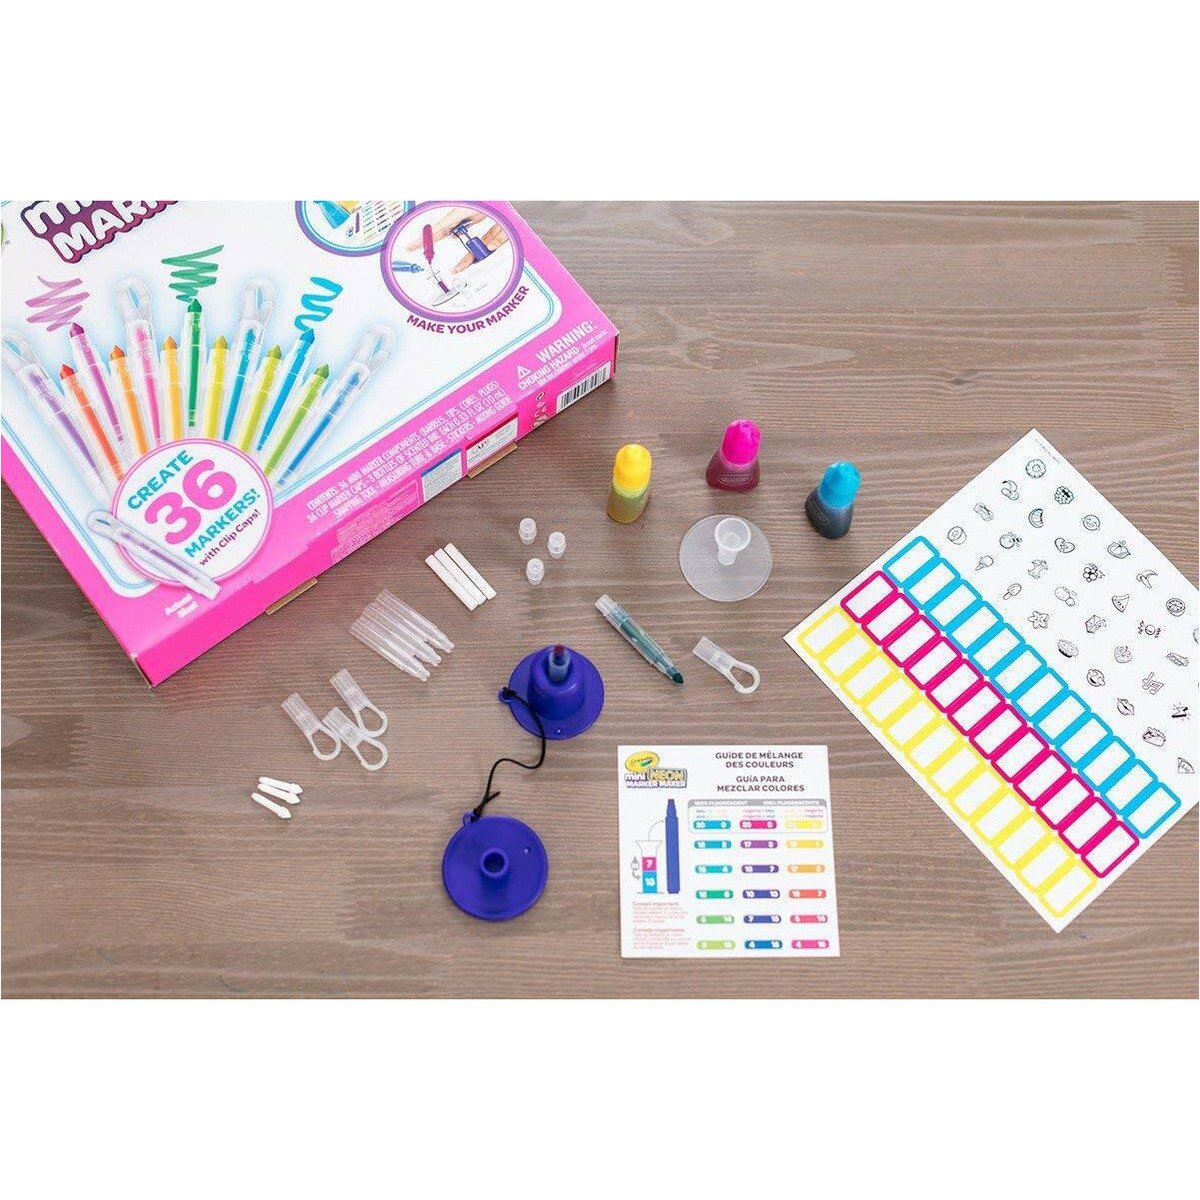 Crayola Crayola mini Neon Marker Maker - 36 Markers with Clips Caps